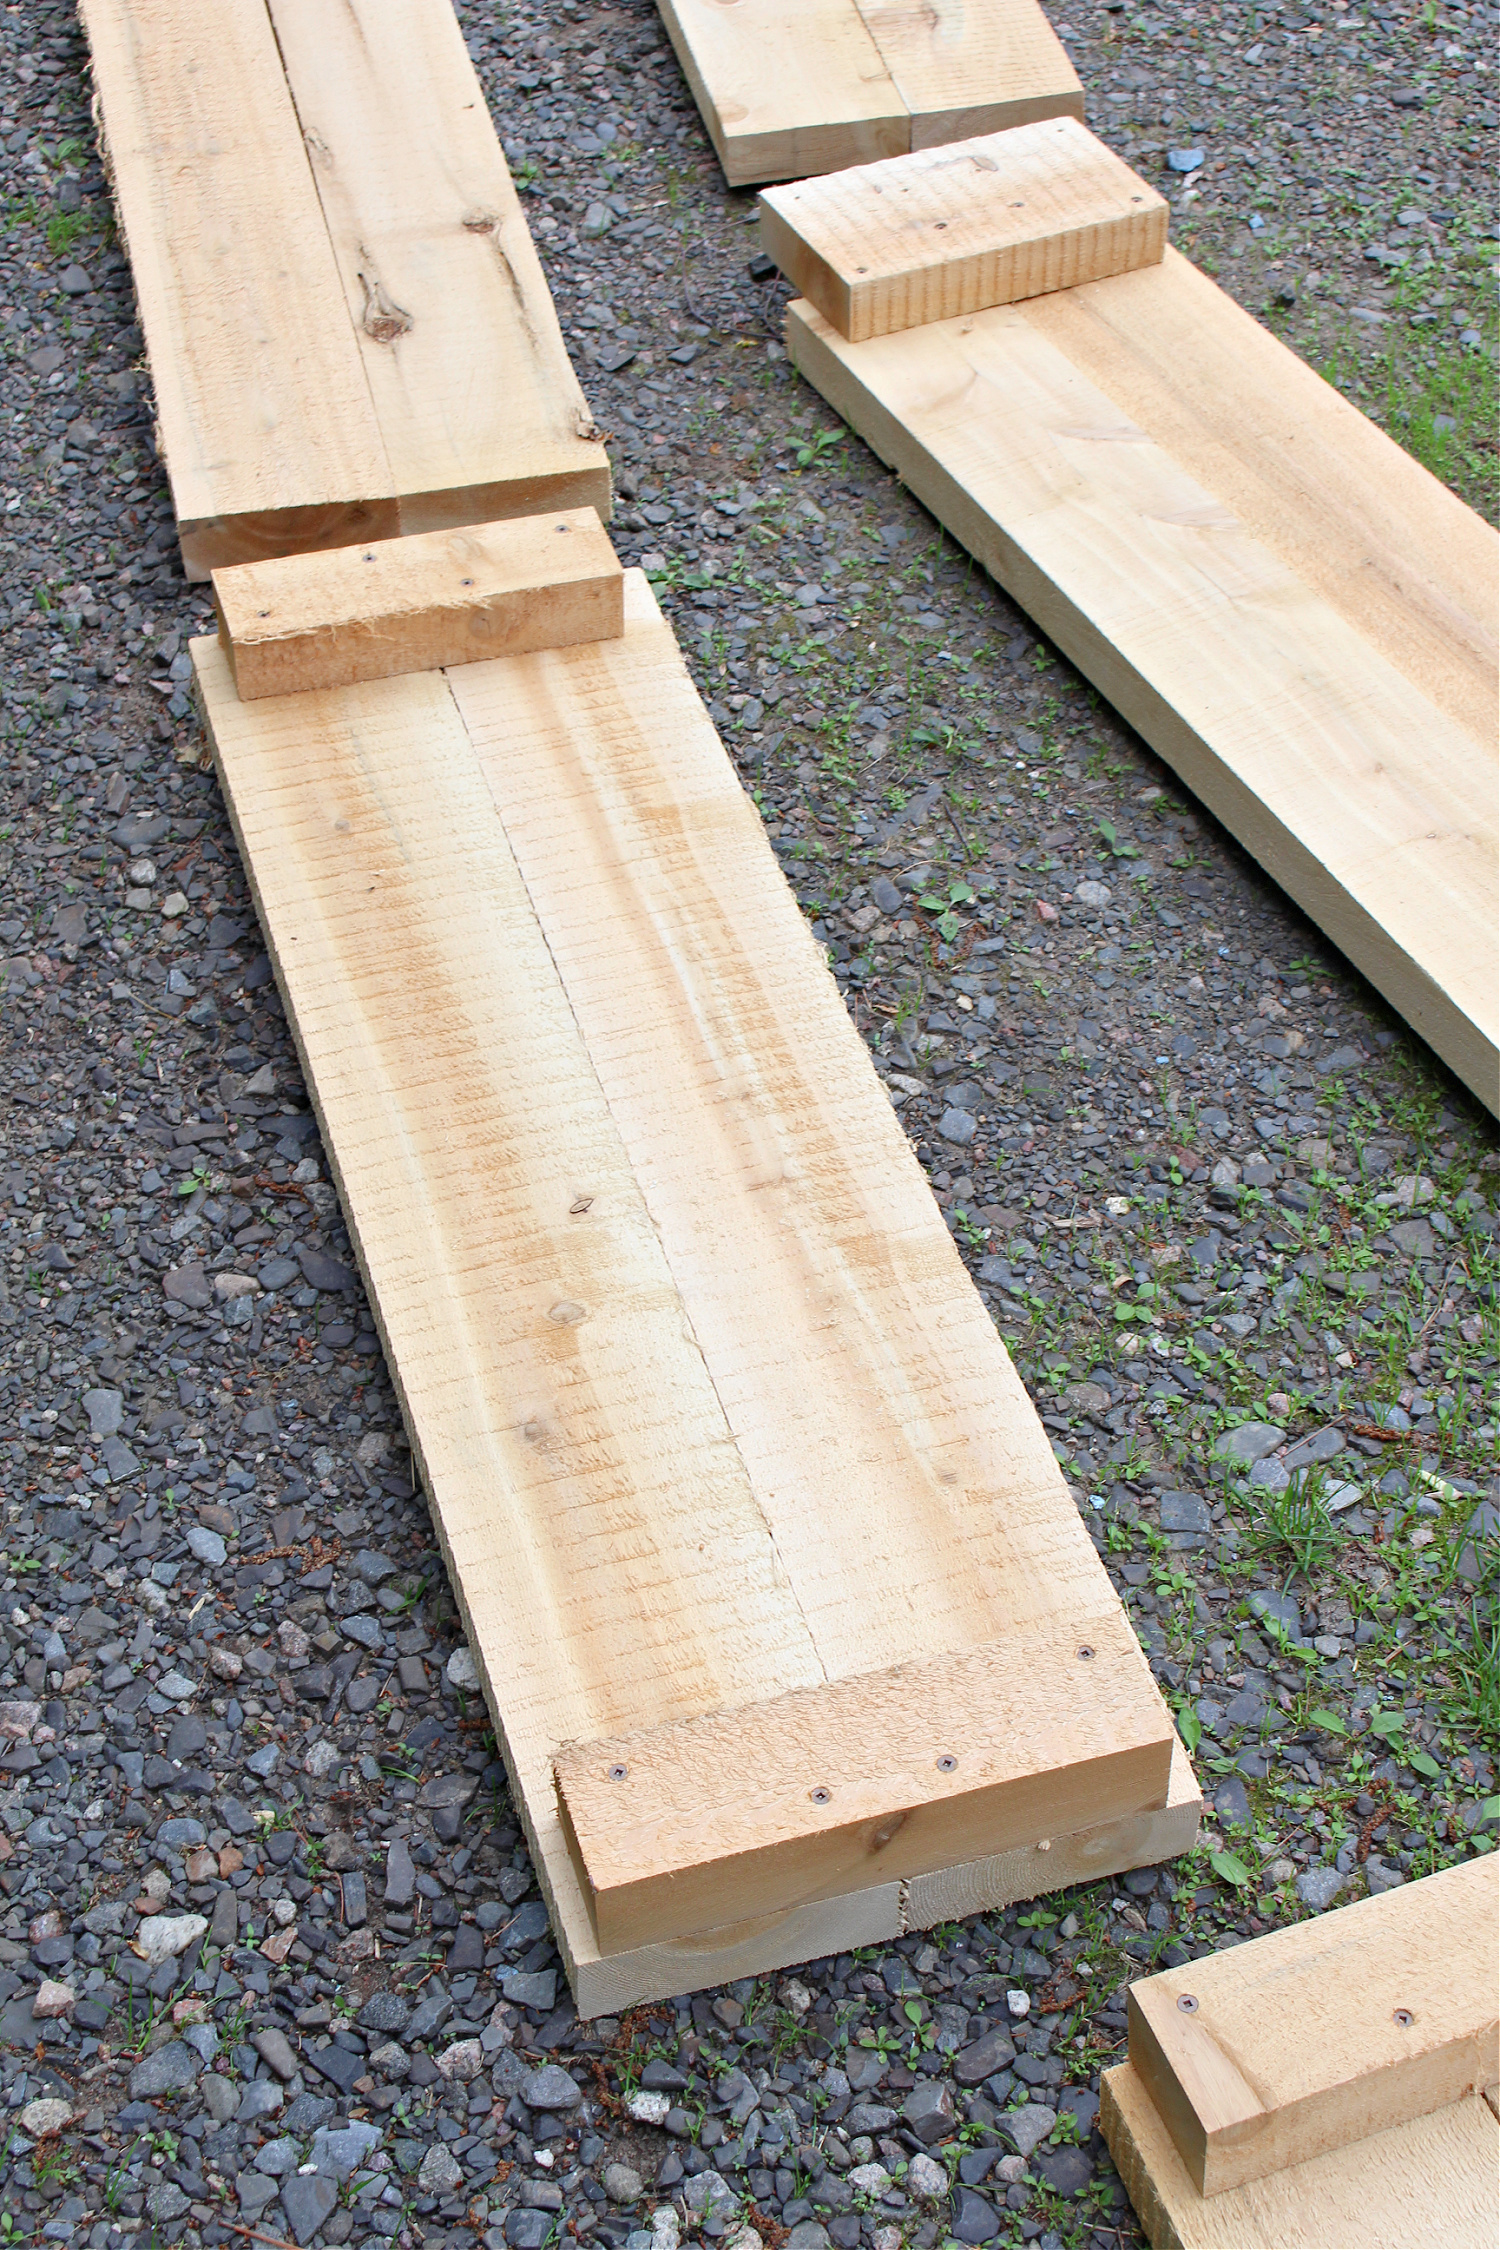 How to Assemble Raised Garden Beds